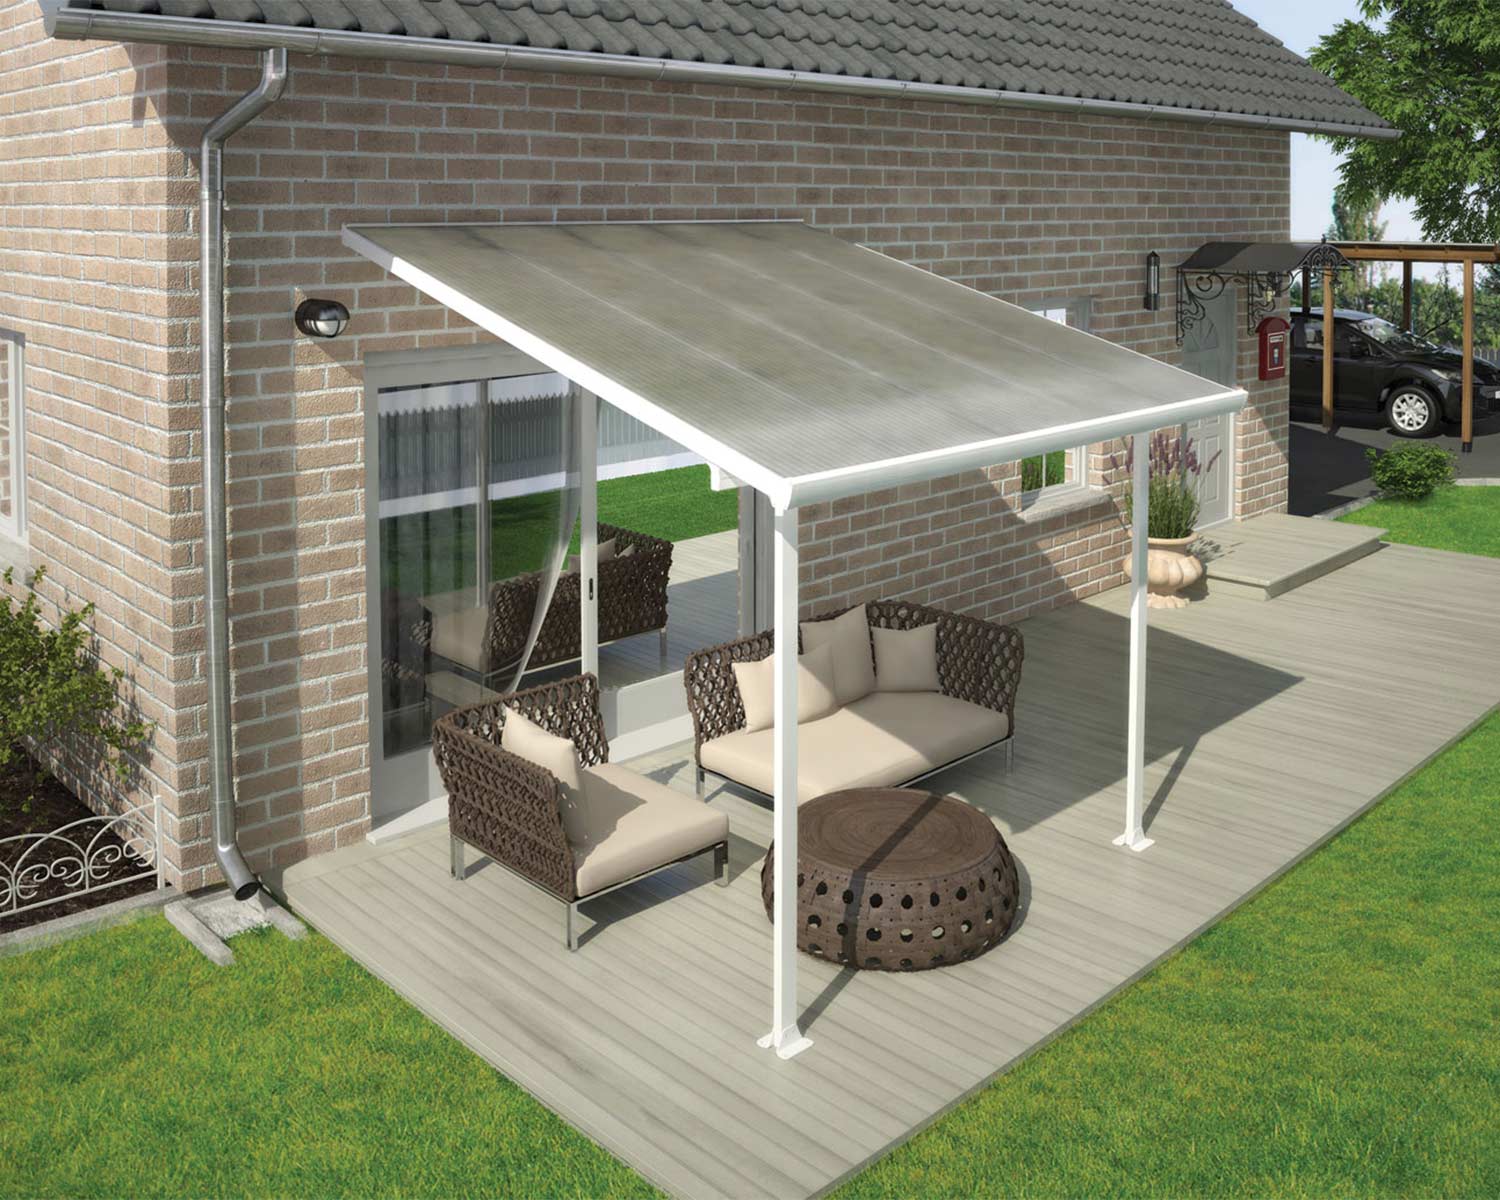 Feria 10 ft. x 10 ft. White Aluminium Patio Cover with 2 Posts and Clear Polycarbonate Roof Panels Attached to House that Covers Patio Outdoor Furniture